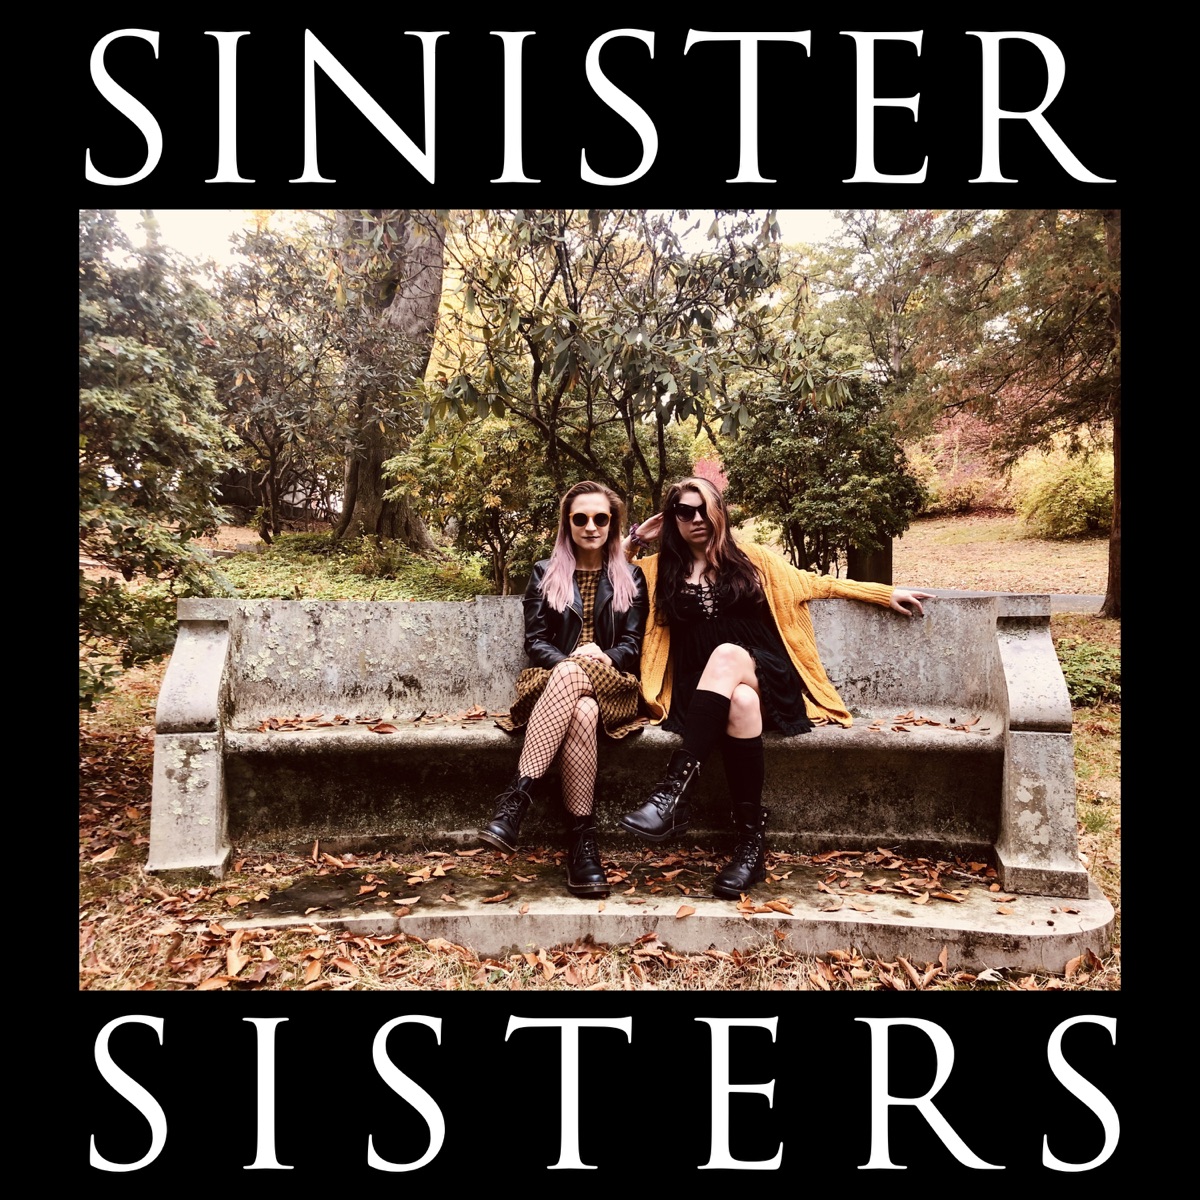 The sinister sisters